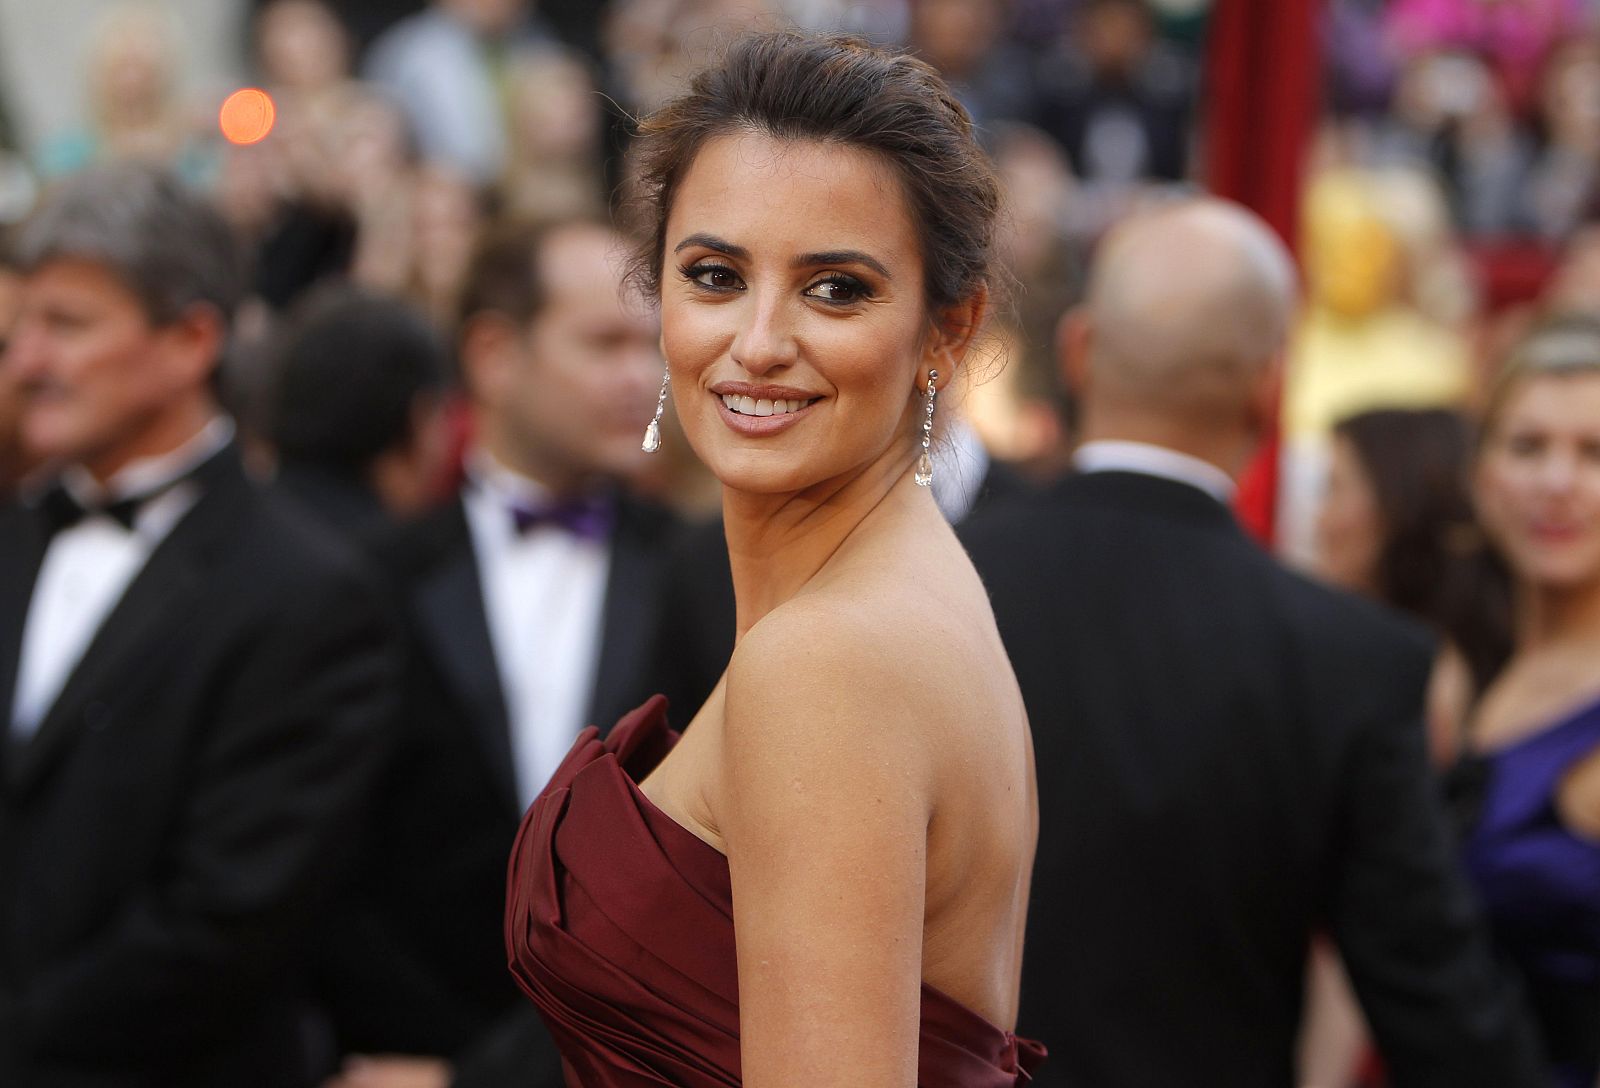 Penelope Cruz, best supporting actress nominee for "Nine," arrives at the 82nd Academy Awards in Hollywood